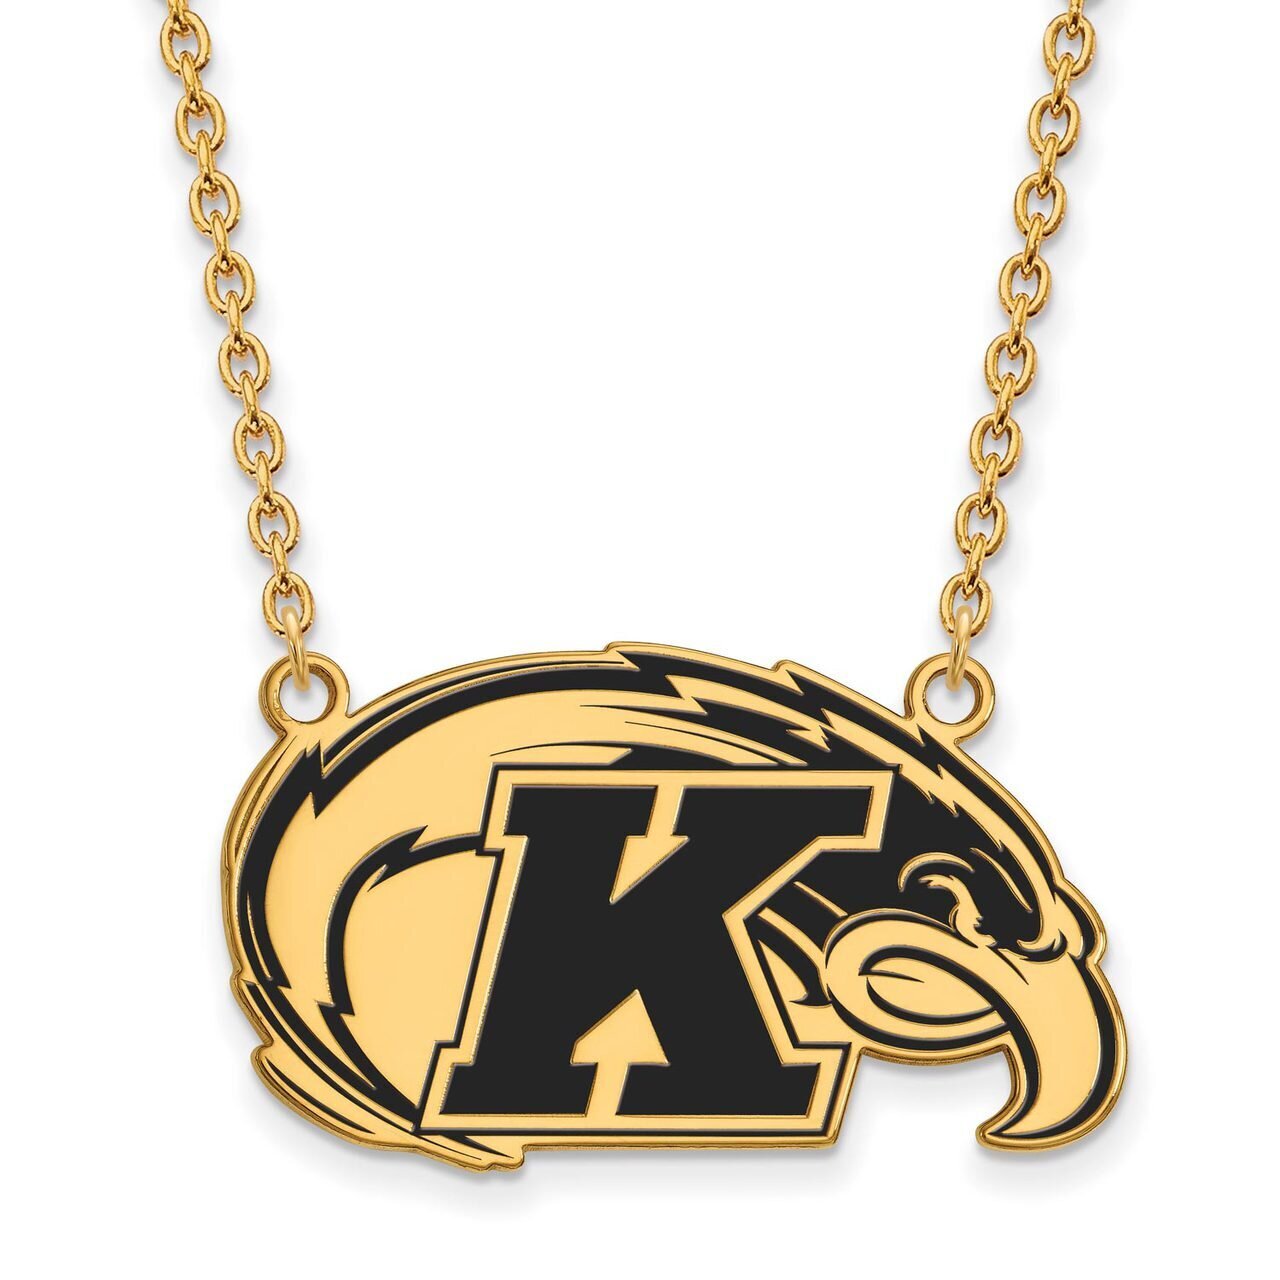 Kent State University Large Enamel Pendant with Chain Necklace Gold-plated Silver GP010KEN-18